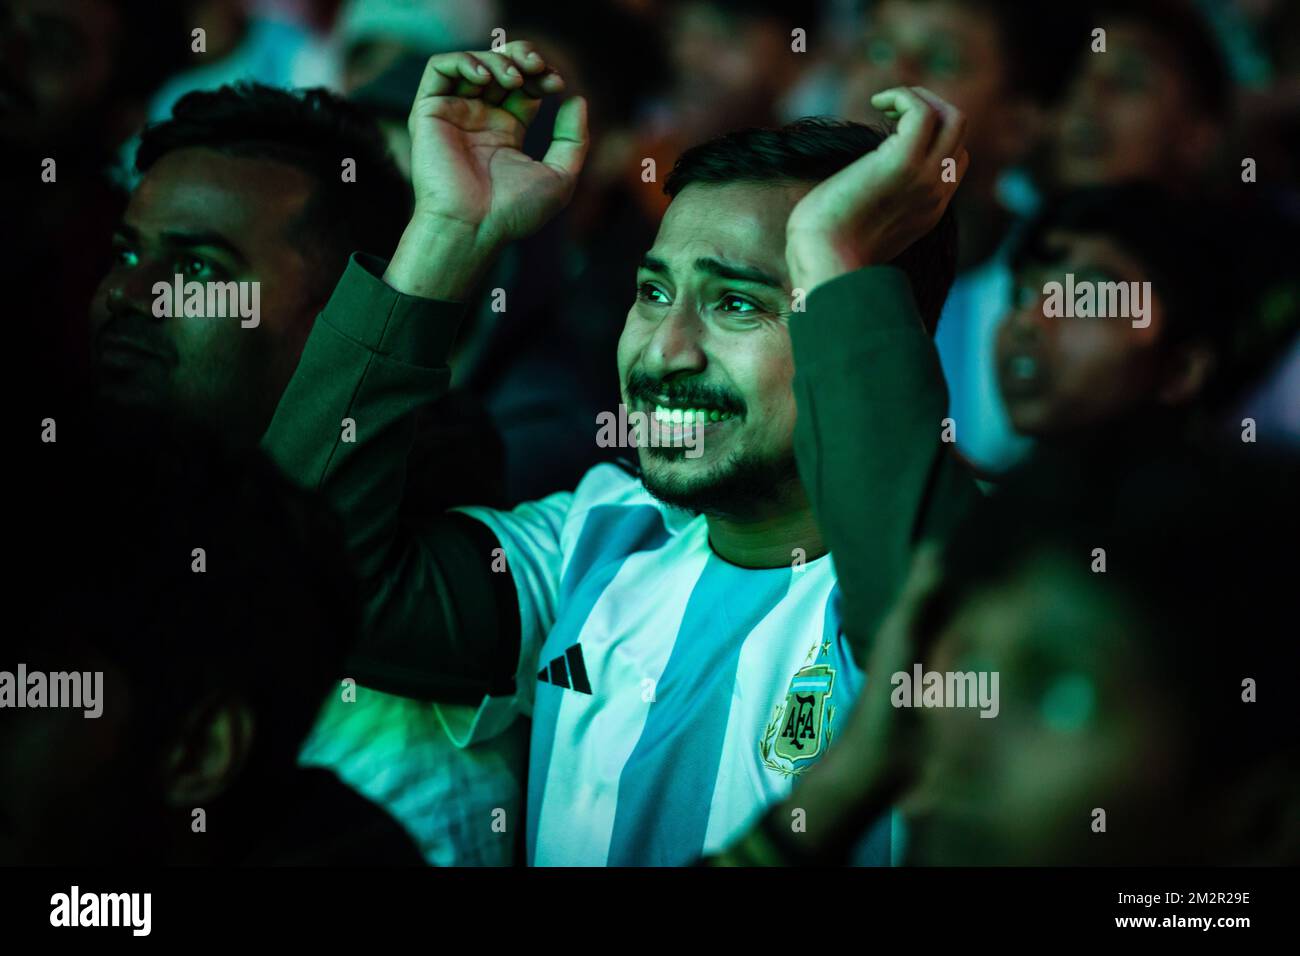 Dhaka, Bangladesh. 14th Dec, 2022. Football fans react as they watch the Qatar 2022 World Cup football match between Argentina and Croatia on a big screen at the Dhaka. The Argentinian team, led by Messi, beat Croatia 3-0, qualifying for the finals, for the first time since 2014. (Photo by Sazzad Hossain/SOPA Images/Sipa USA) Credit: Sipa USA/Alamy Live News Stock Photo